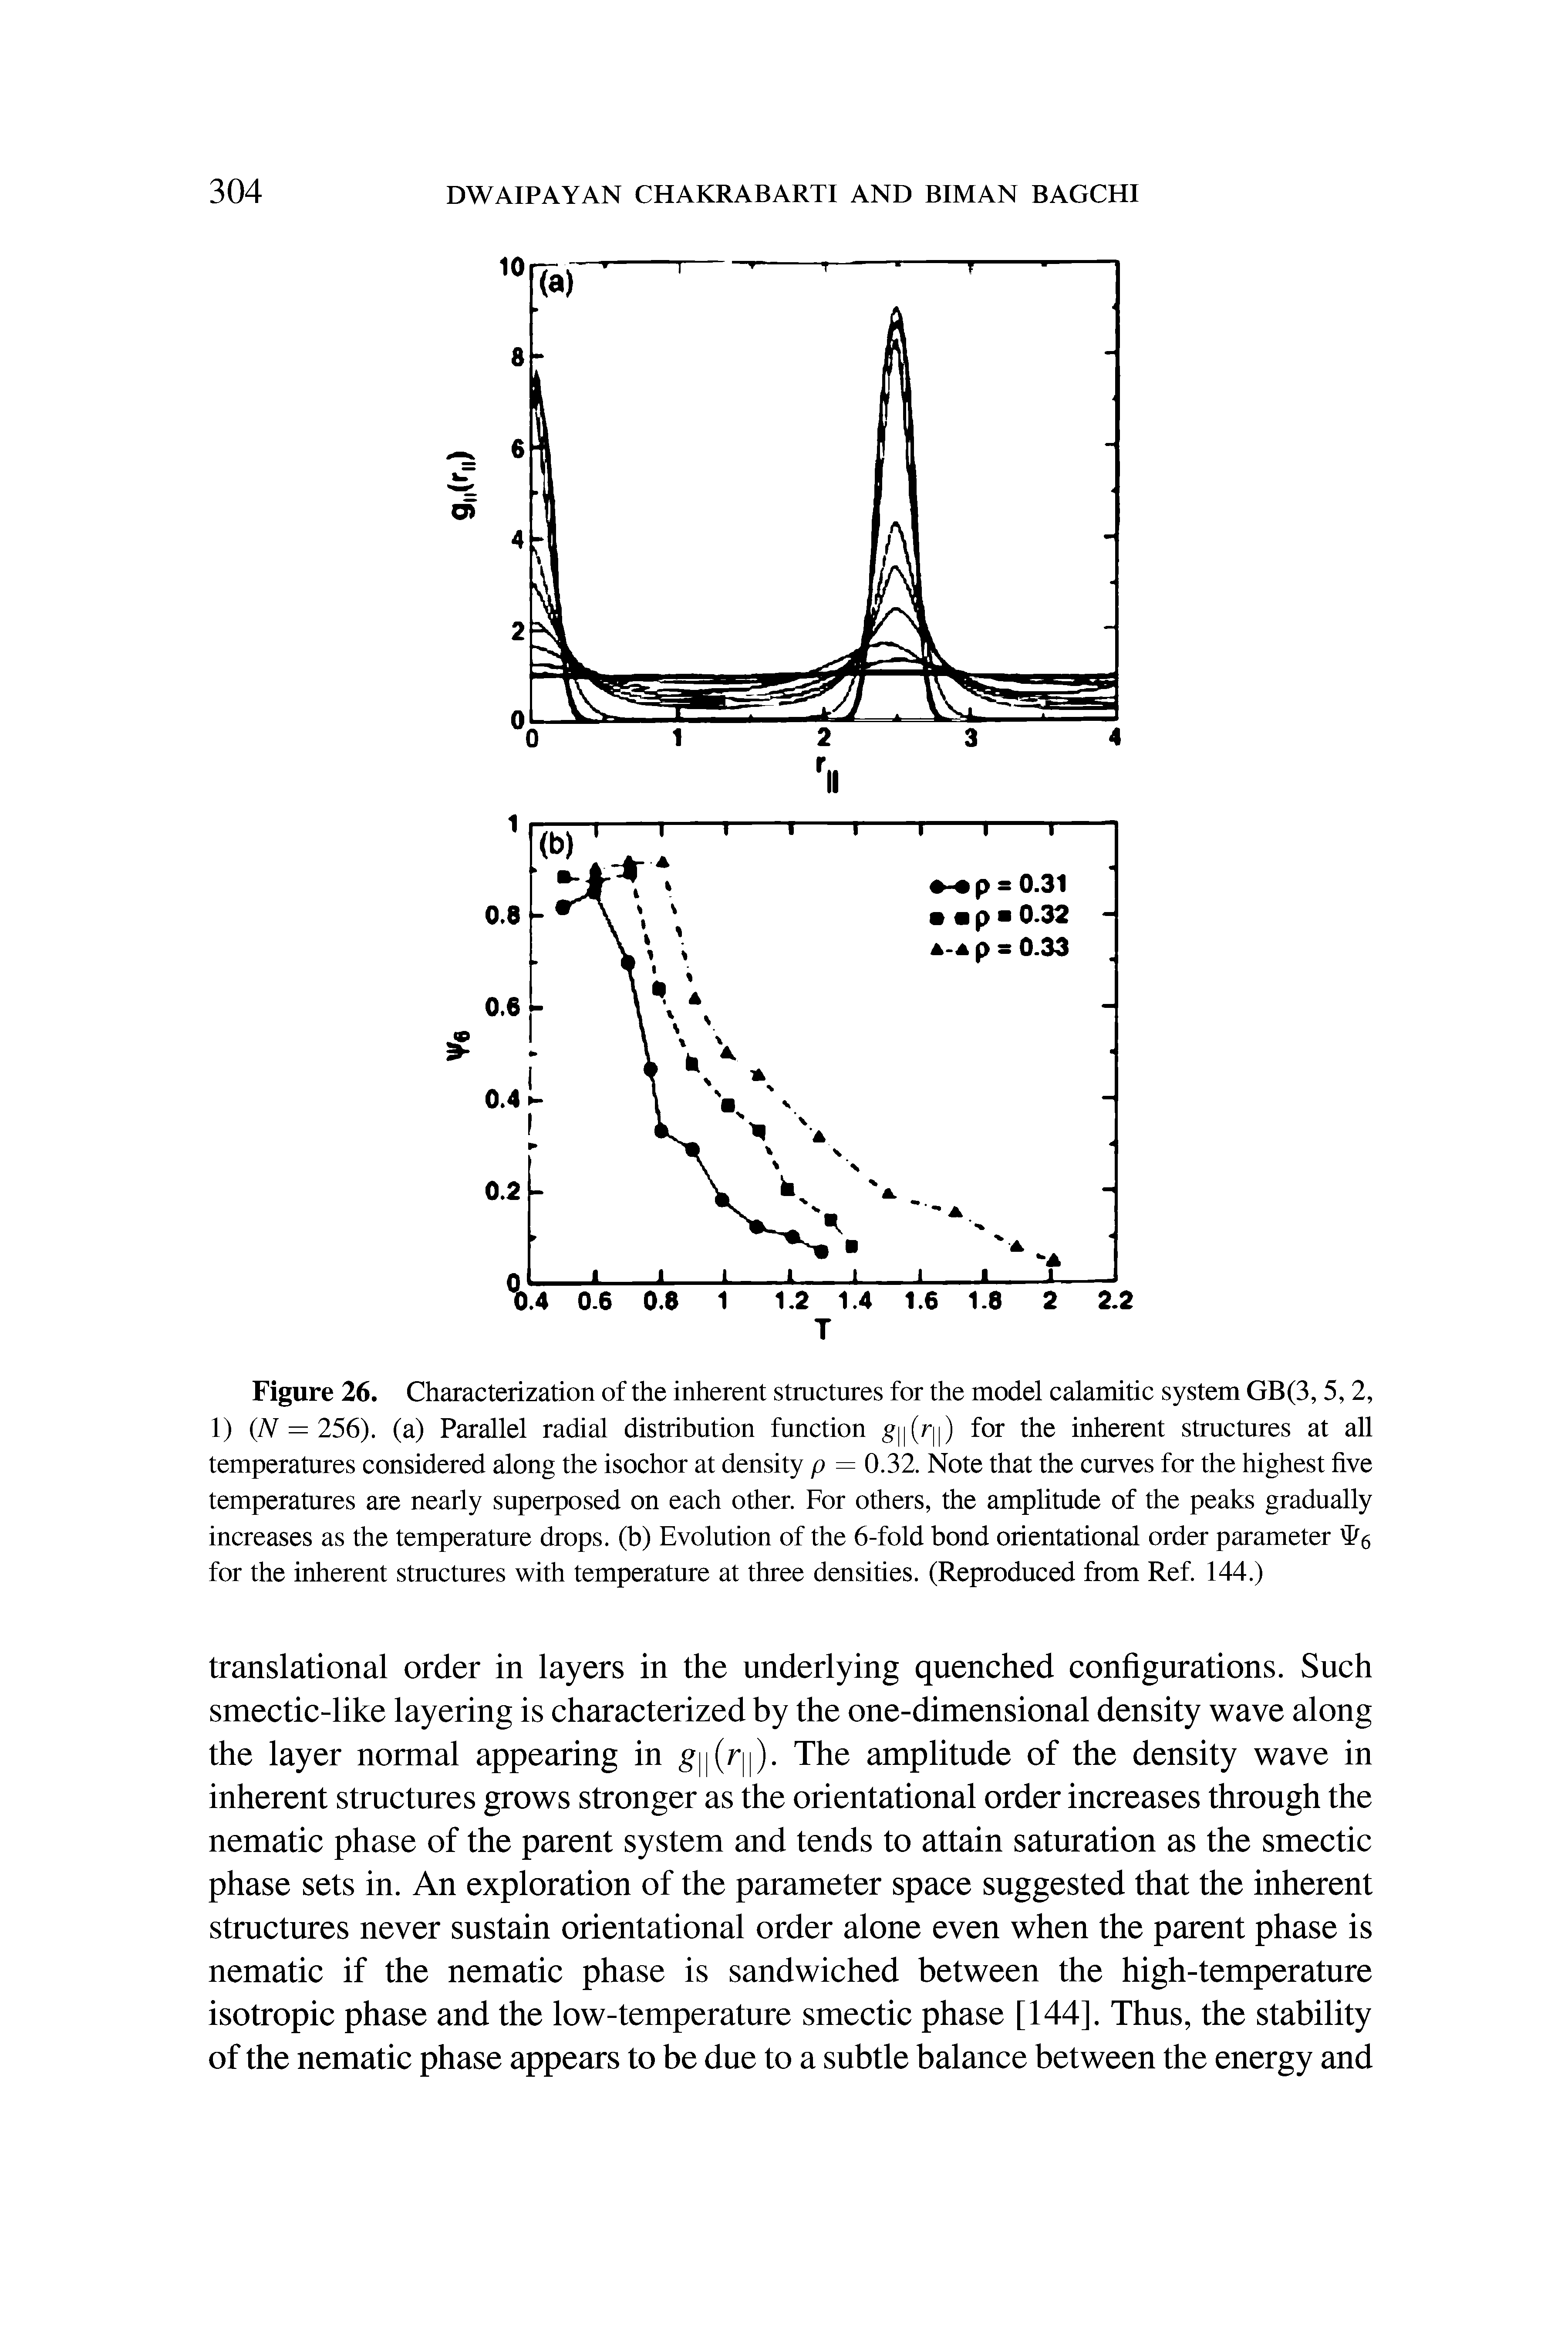 Figure 26. Characterization of the inherent structures for the model calamitic system GB(3,5,2, 1) ( = 256). (a) Parallel radial distribution function g (/ ) for the inherent structures at all temperatures considered along the isochor at density p = 0.32. Note that the curves for the highest five temperatures are nearly superposed on each other. For others, the amplitude of the peaks gradually increases as the temperature drops, (b) Evolution of the 6-fold bond orientational order parameter 4>6 for the inherent stmctures with temperature at three densities. (Reproduced from Ref. 144.)...